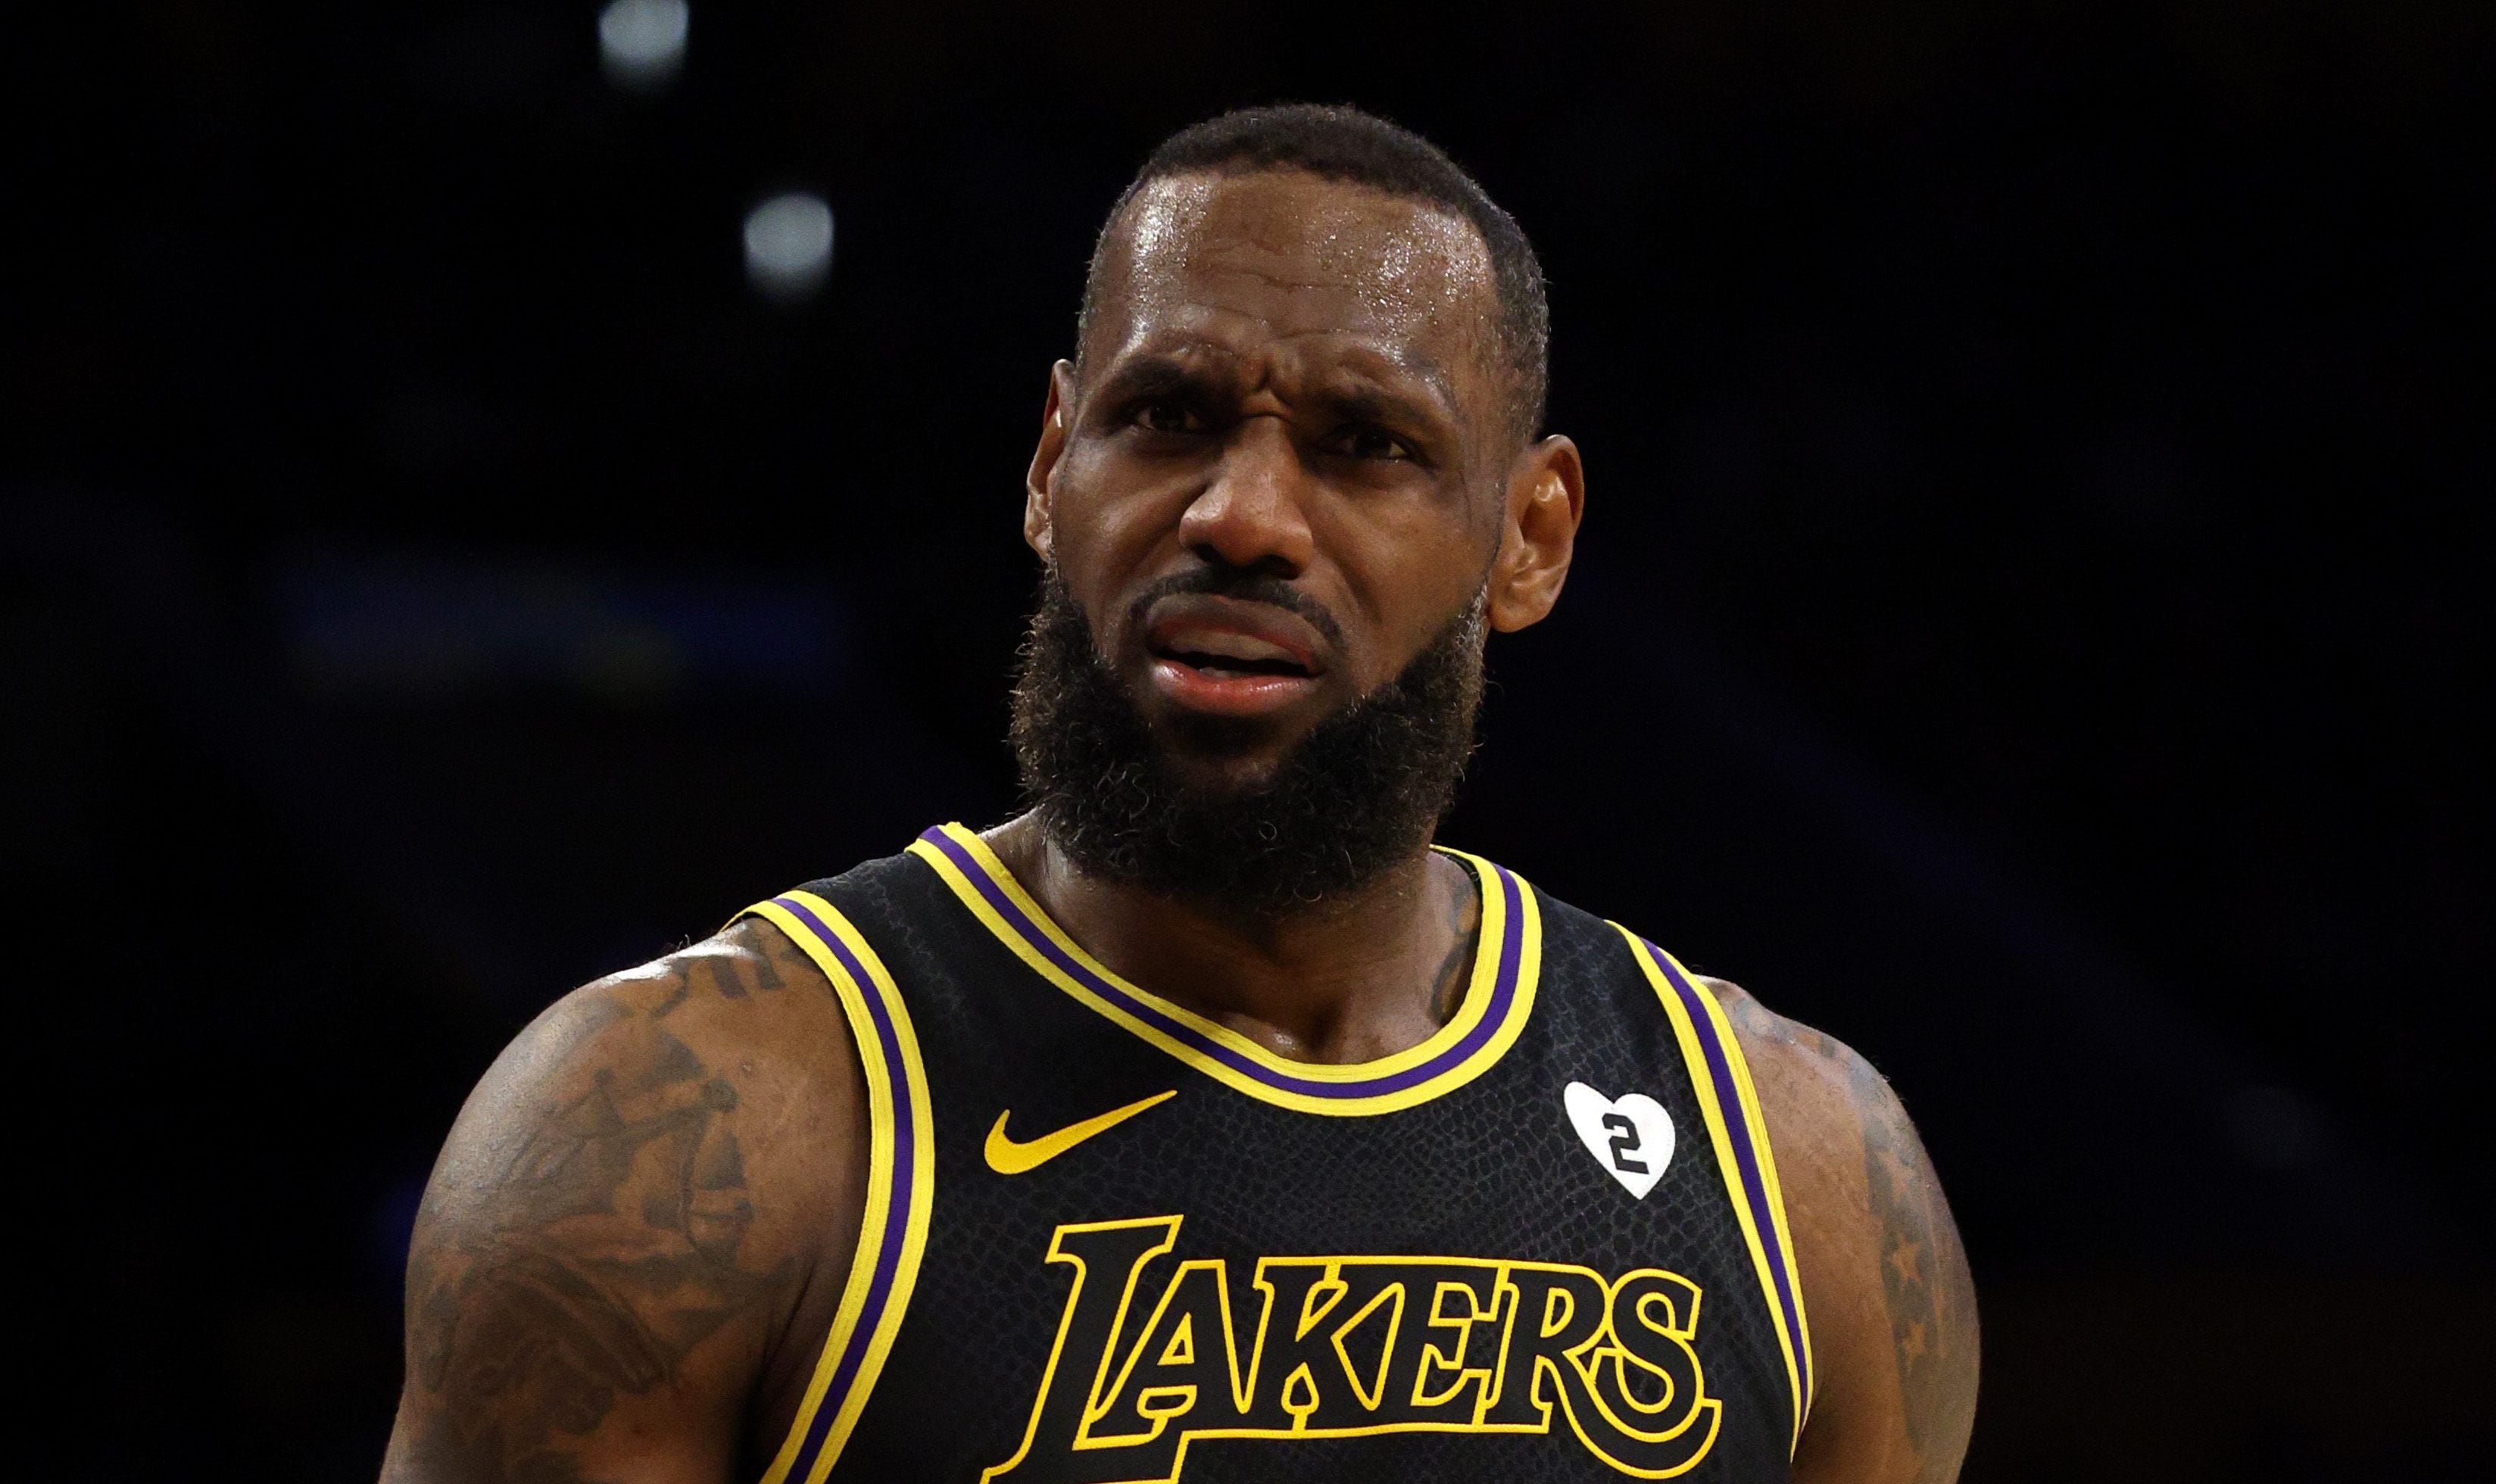 lebron james said he’s still unsure if he’ll want a farewell tour for his future nba retirement